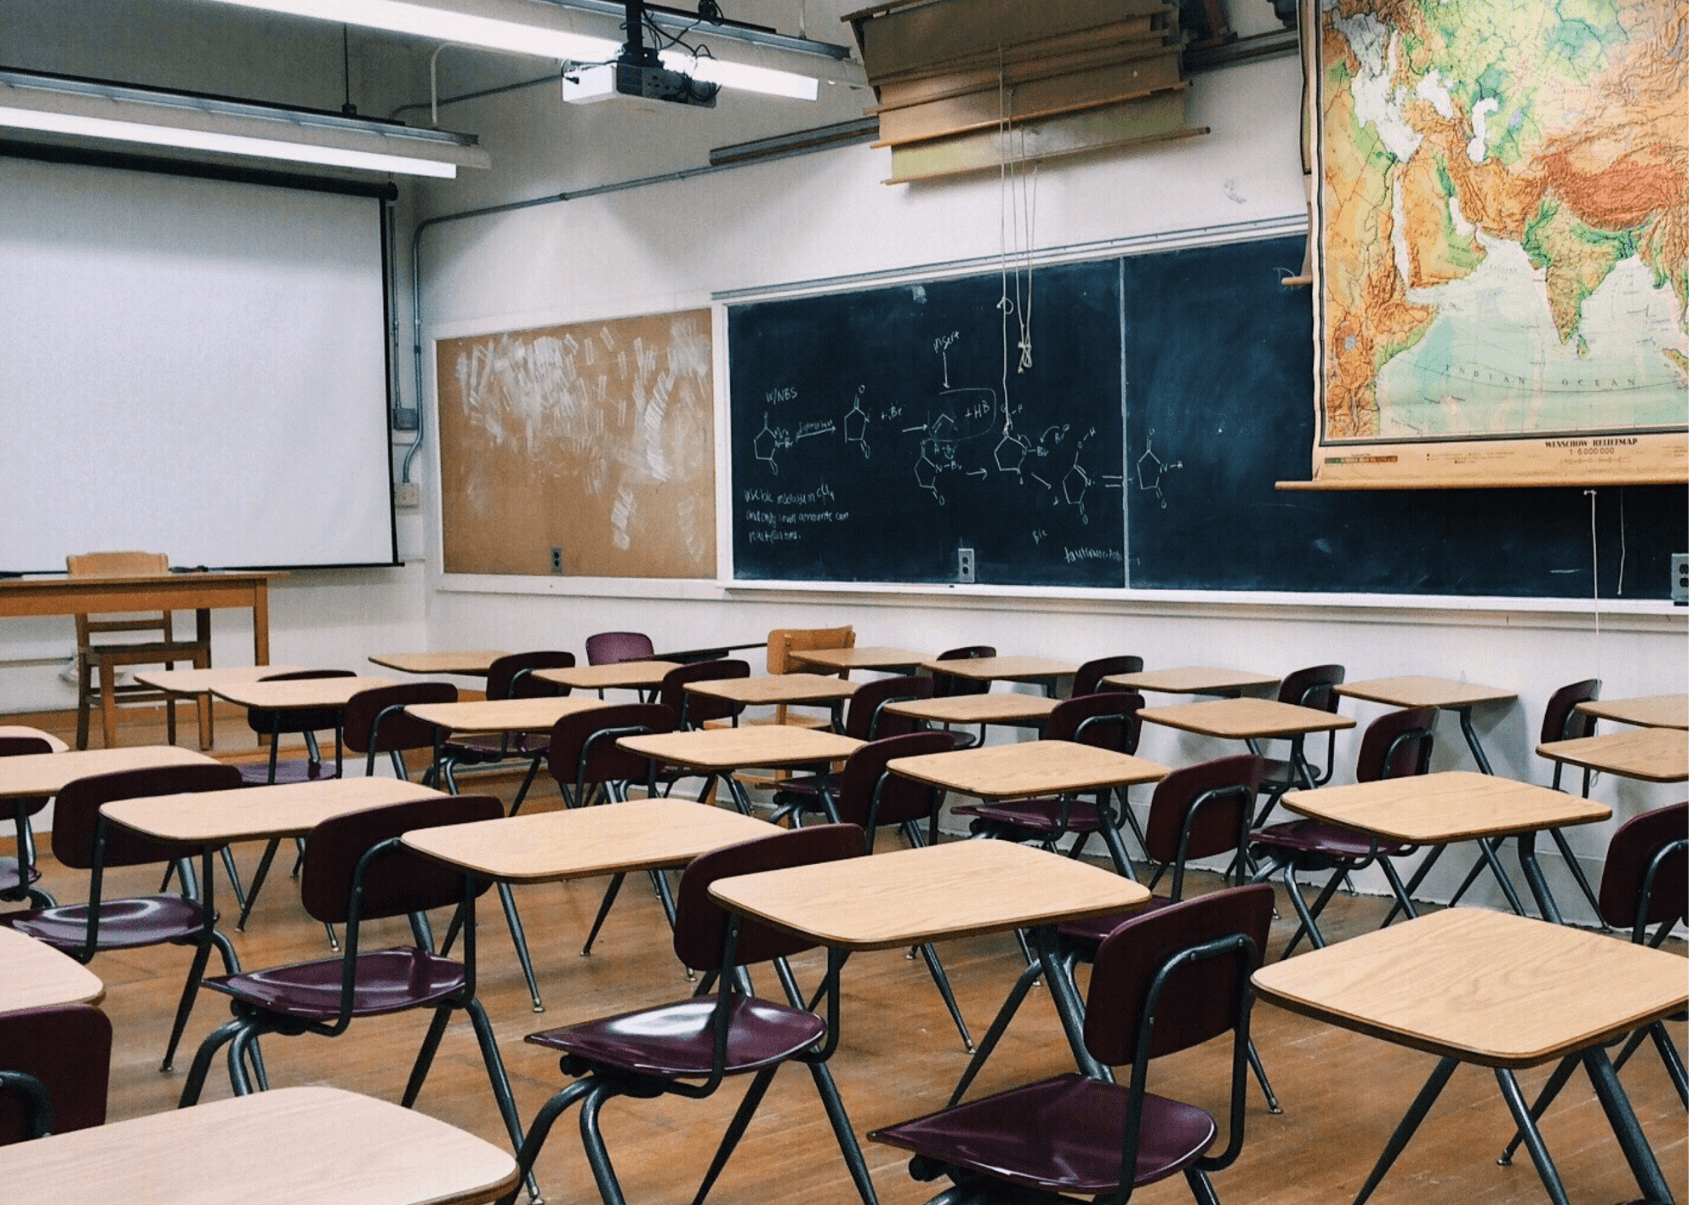 An empty classroom full of desks. There is writing on the chalk board and a map hanging on the wall.